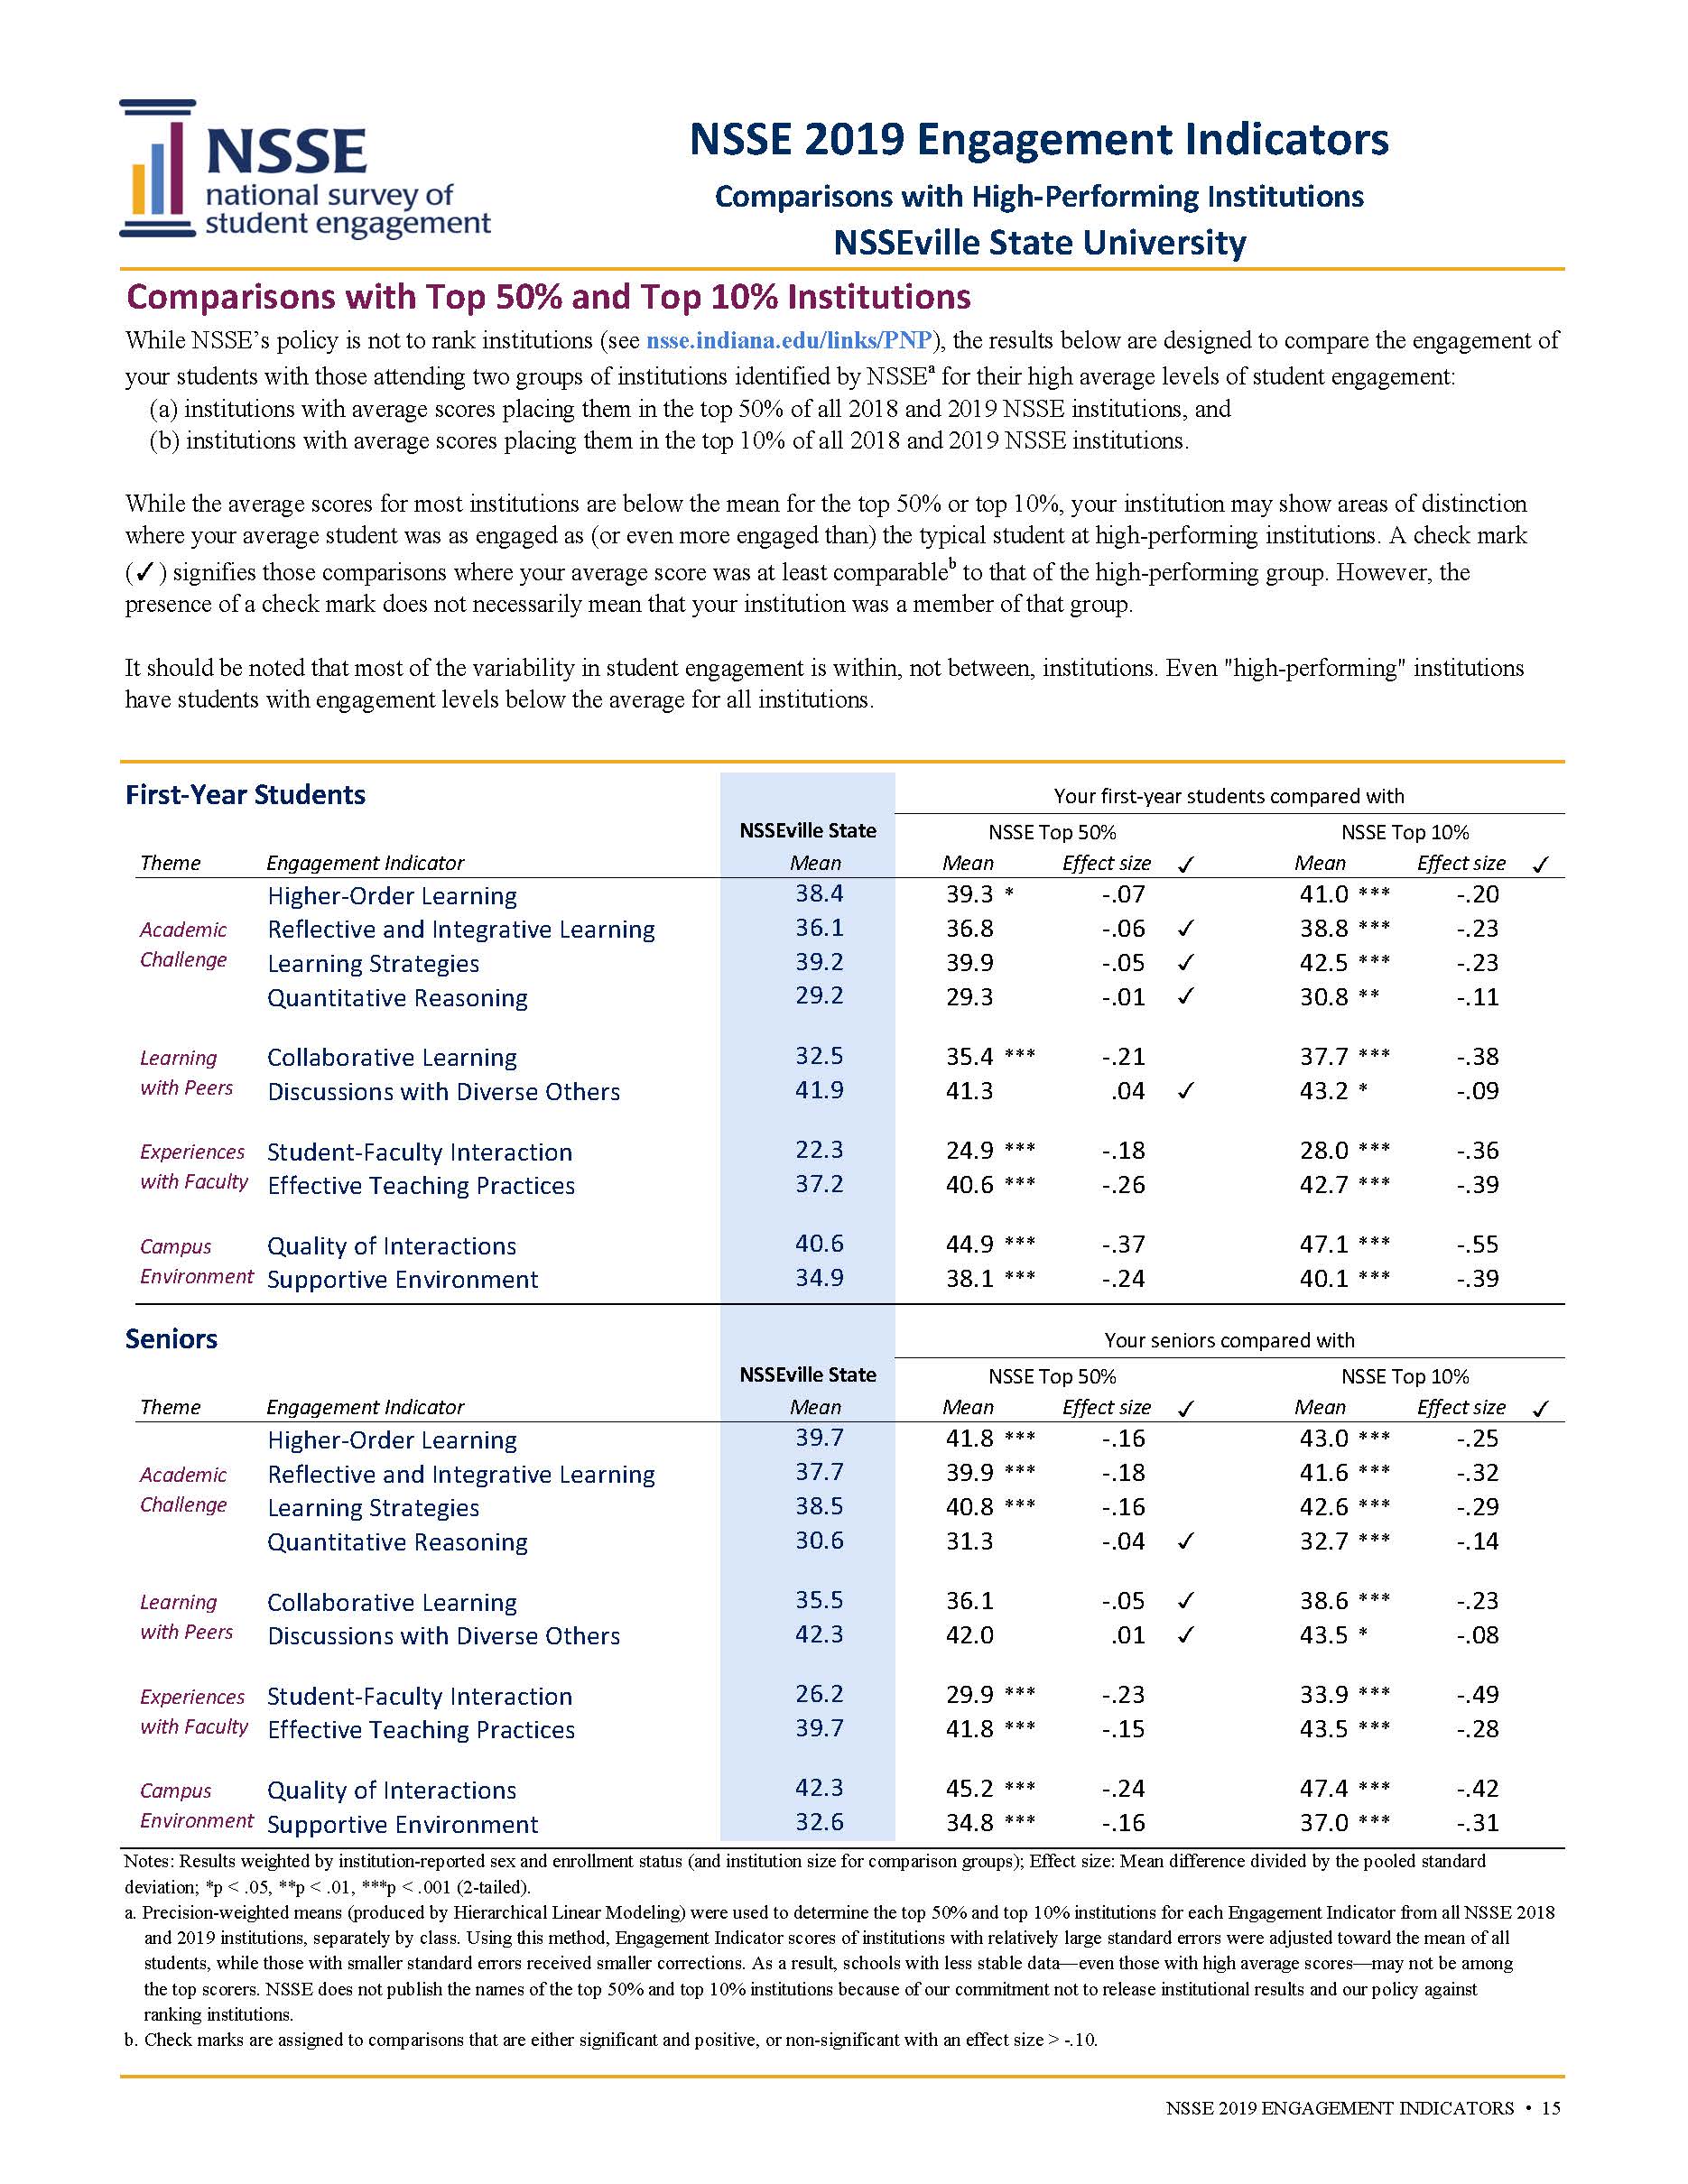 Sample Report: page 15 of NSSE Engagement Indicators